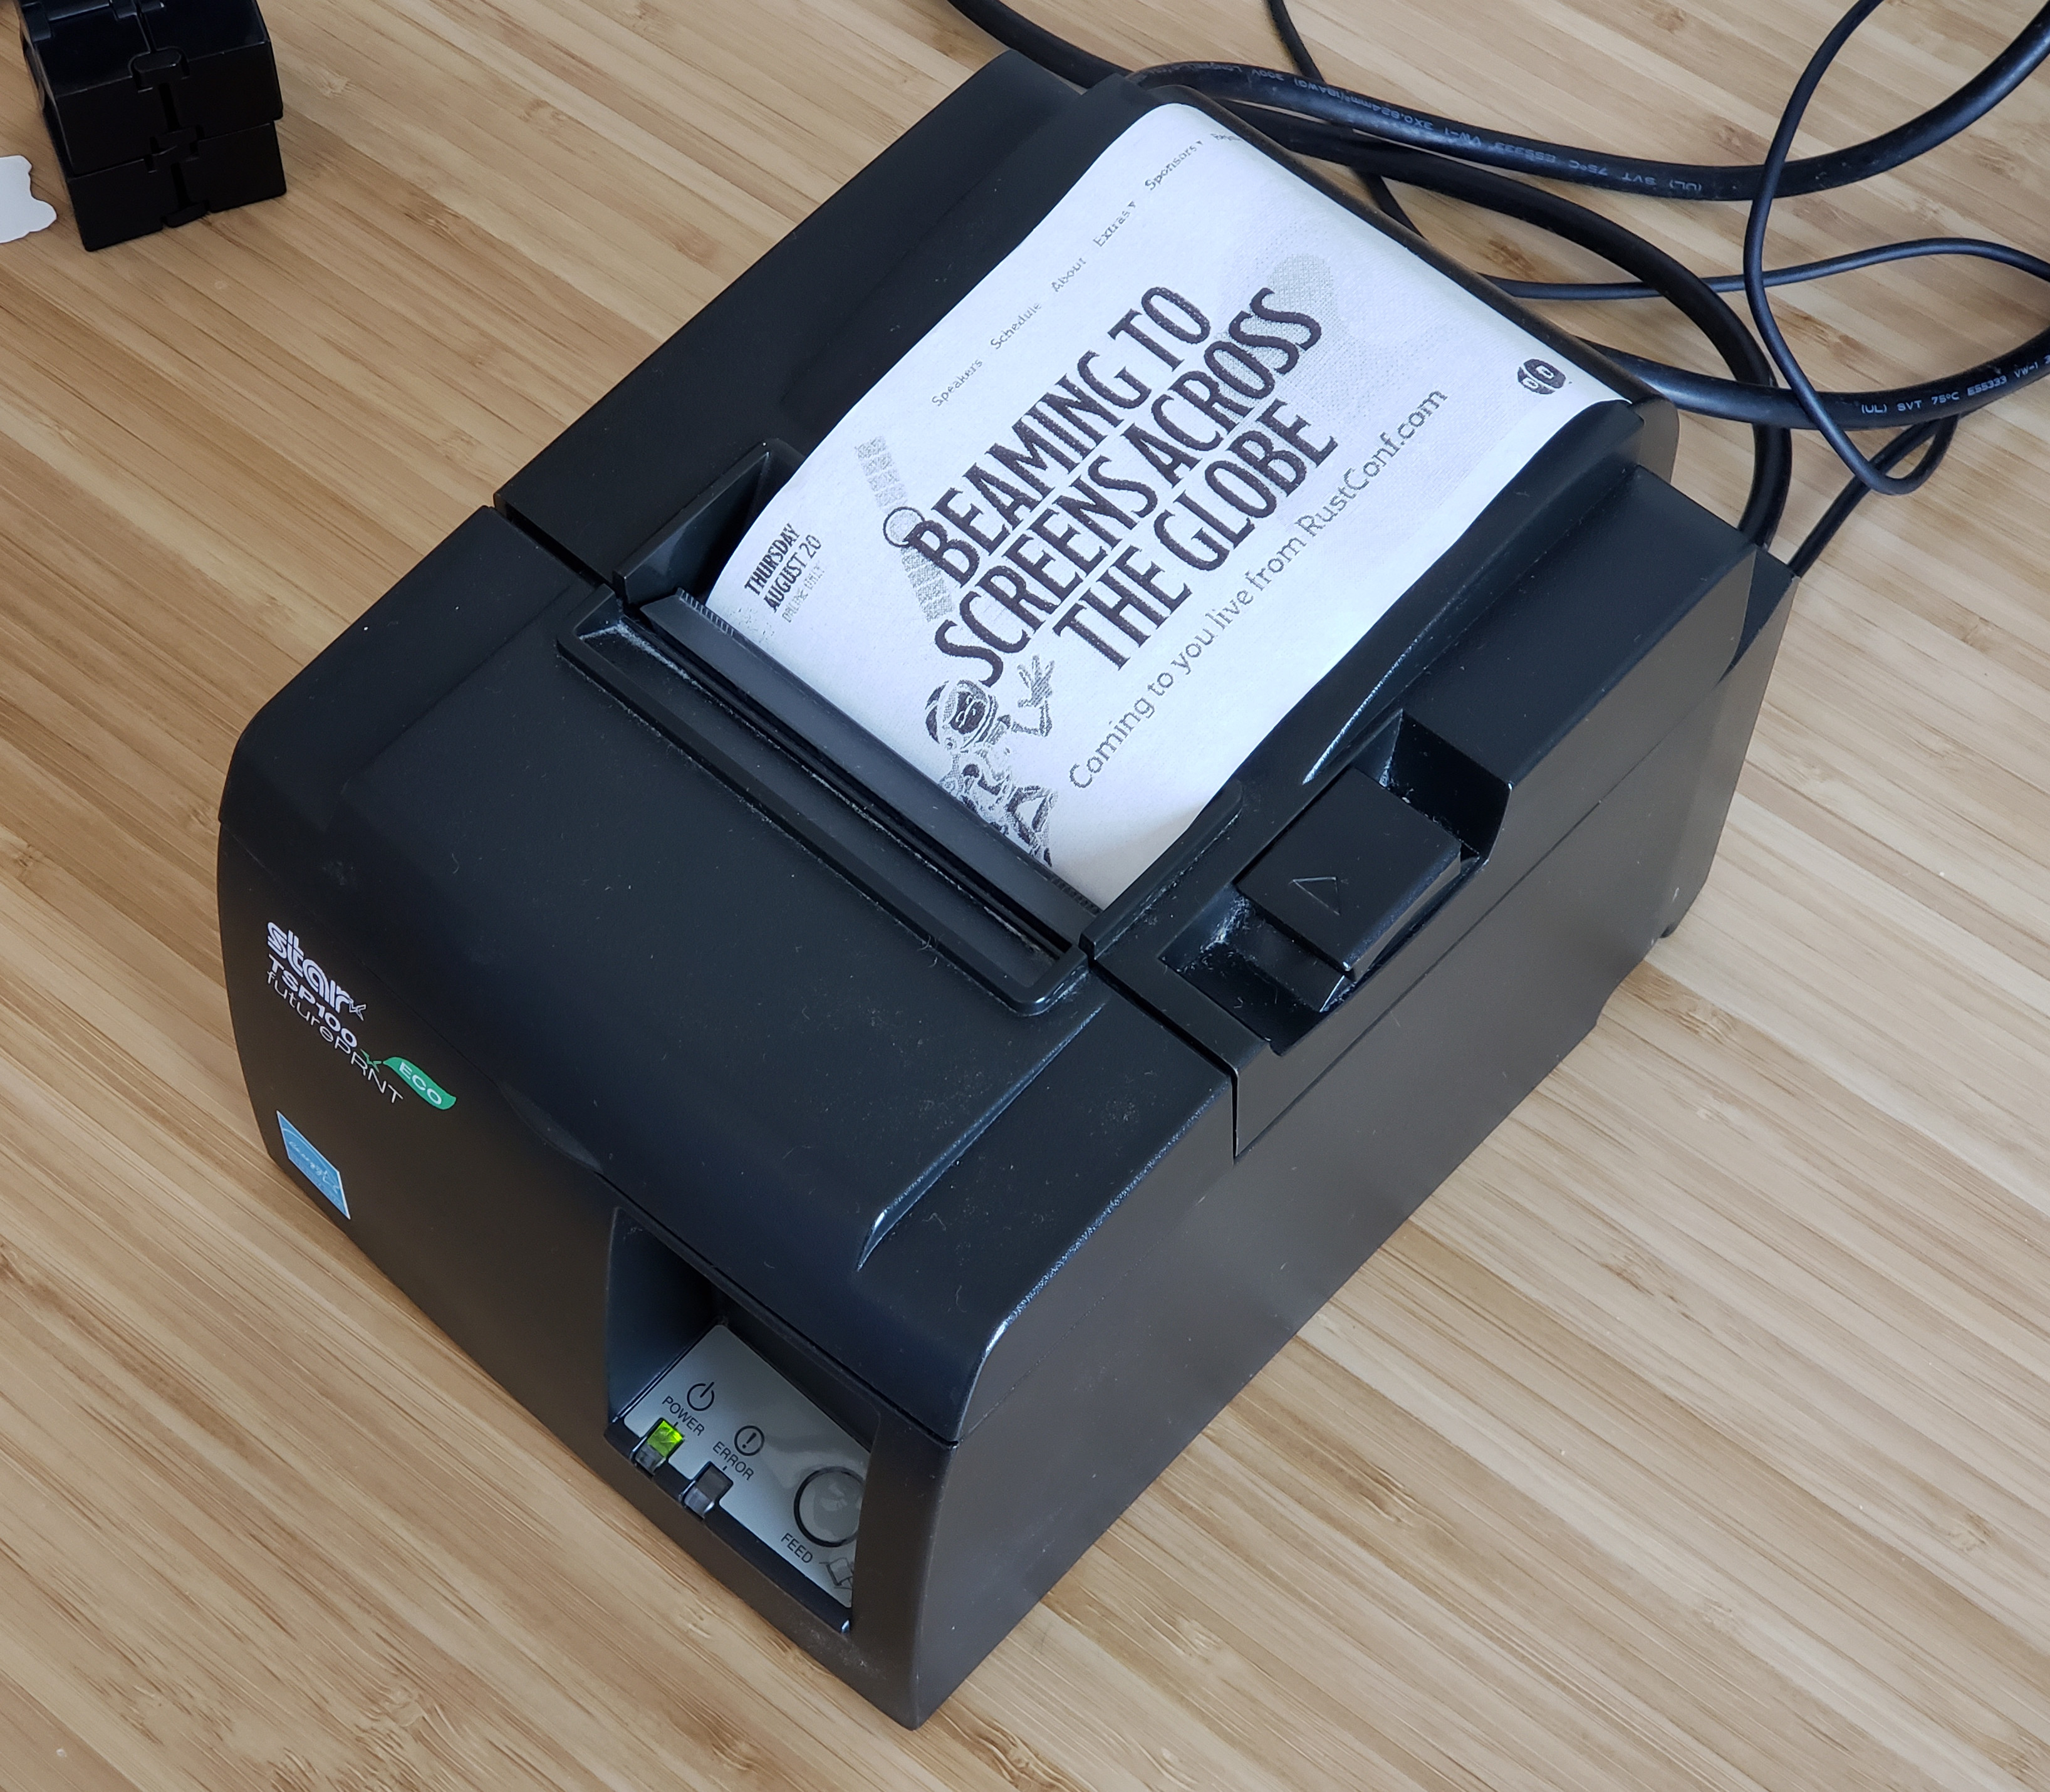 A Star TSP100 Eco futurePRNT 72mm receipt printer, powered on with a printed receipt showing the RustConf homepage reading "Beaming to screens across the globe"